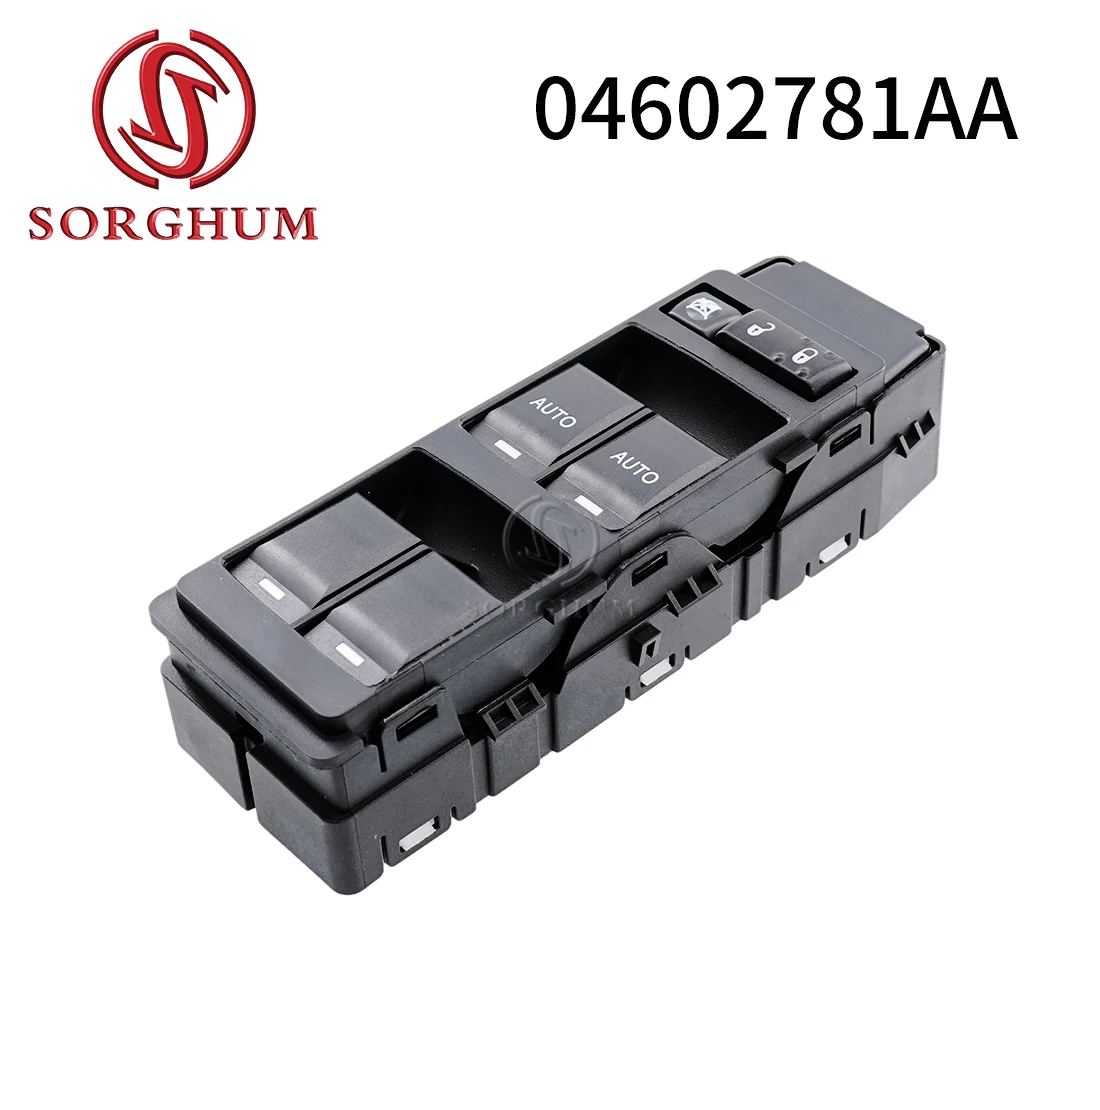 

Sorghum 04602781AA Power Window Switch Button For Jeep Grand Commander Cherokee Chrysler 200 300 Sebring Dodge Charger Avenger